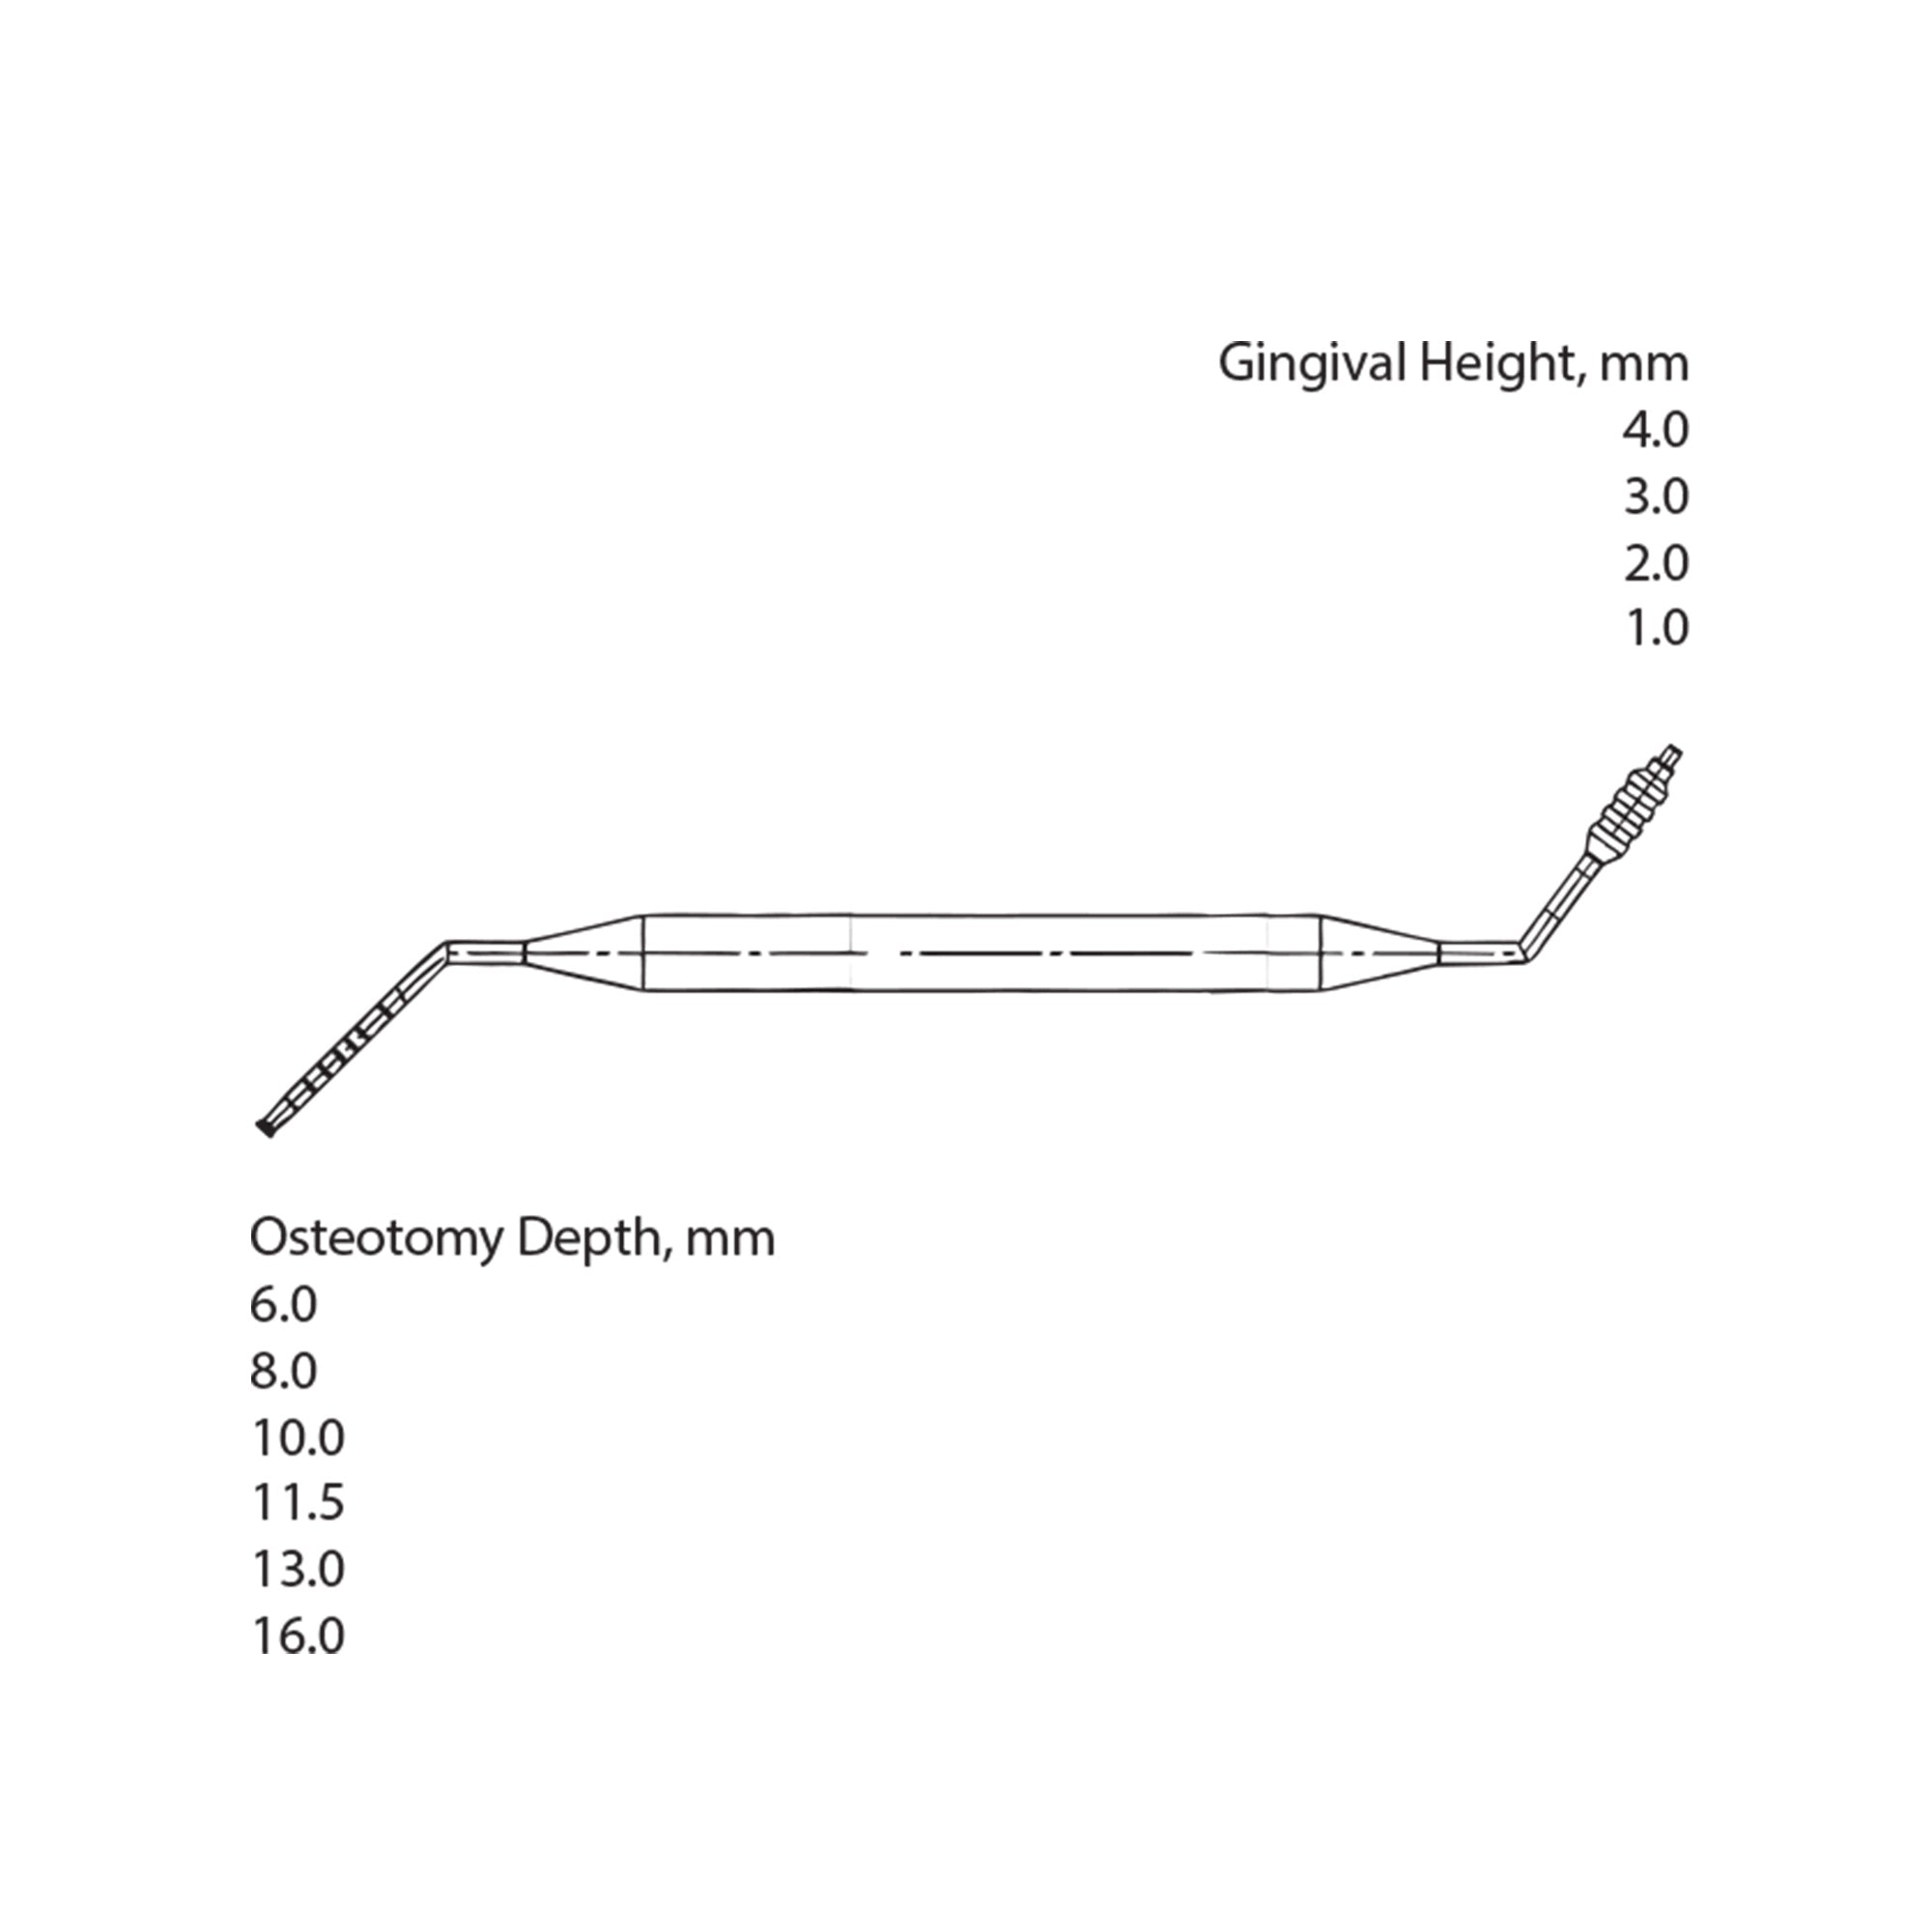 DSI Depth Gauge Measuring Tool Two Sided (Osteotomy / Gingival)